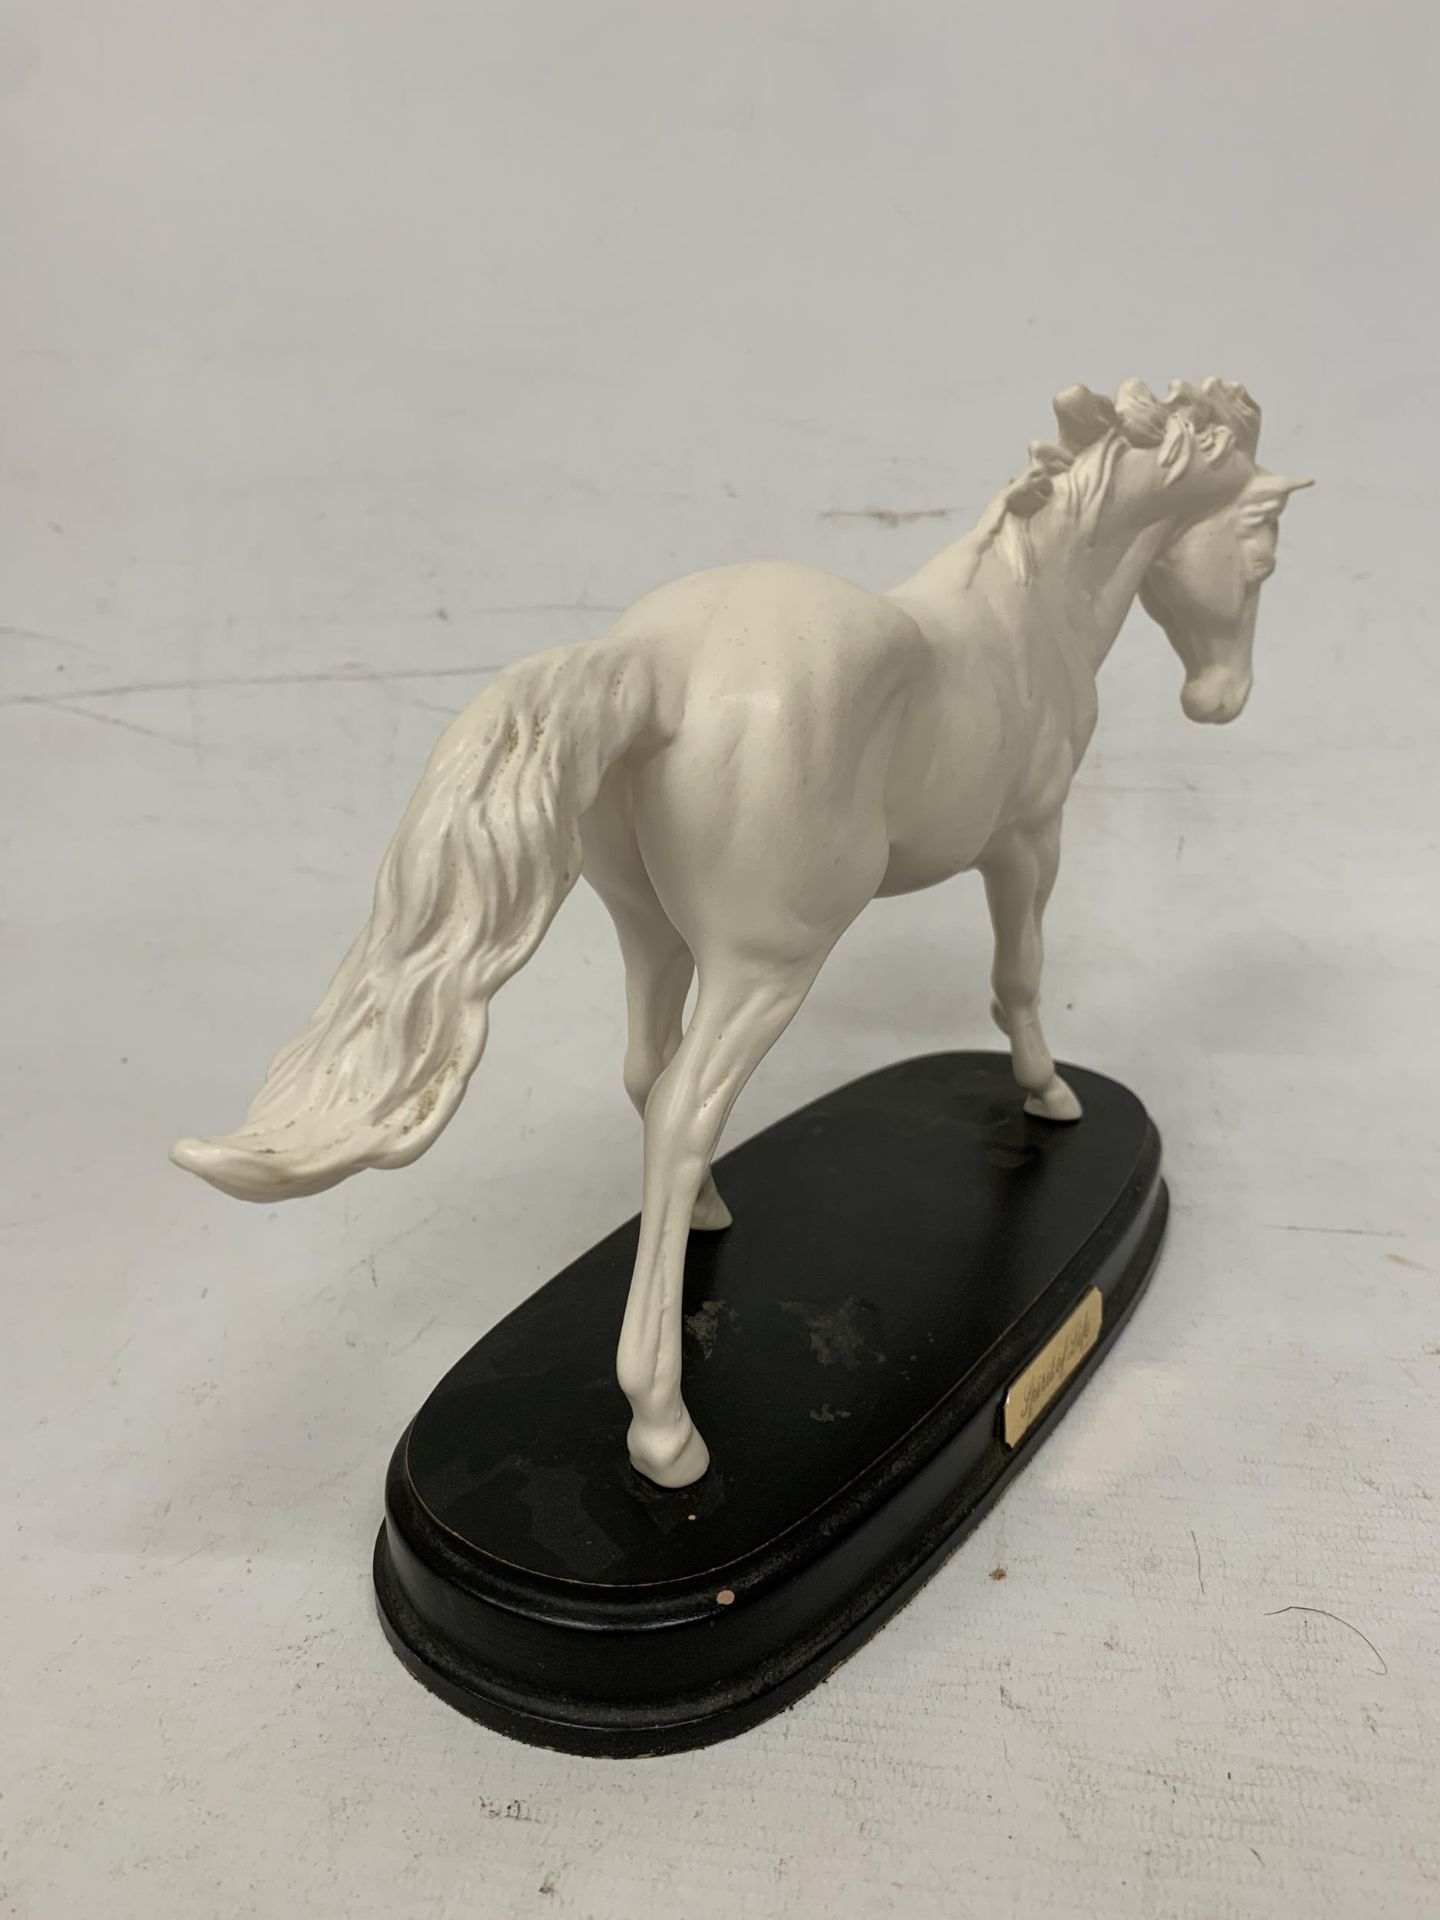 A ROYAL DOULTON "SPIRIT OF LIFE" FIGURE OF A HORSE ON WOODEN PLINTH - Image 3 of 4